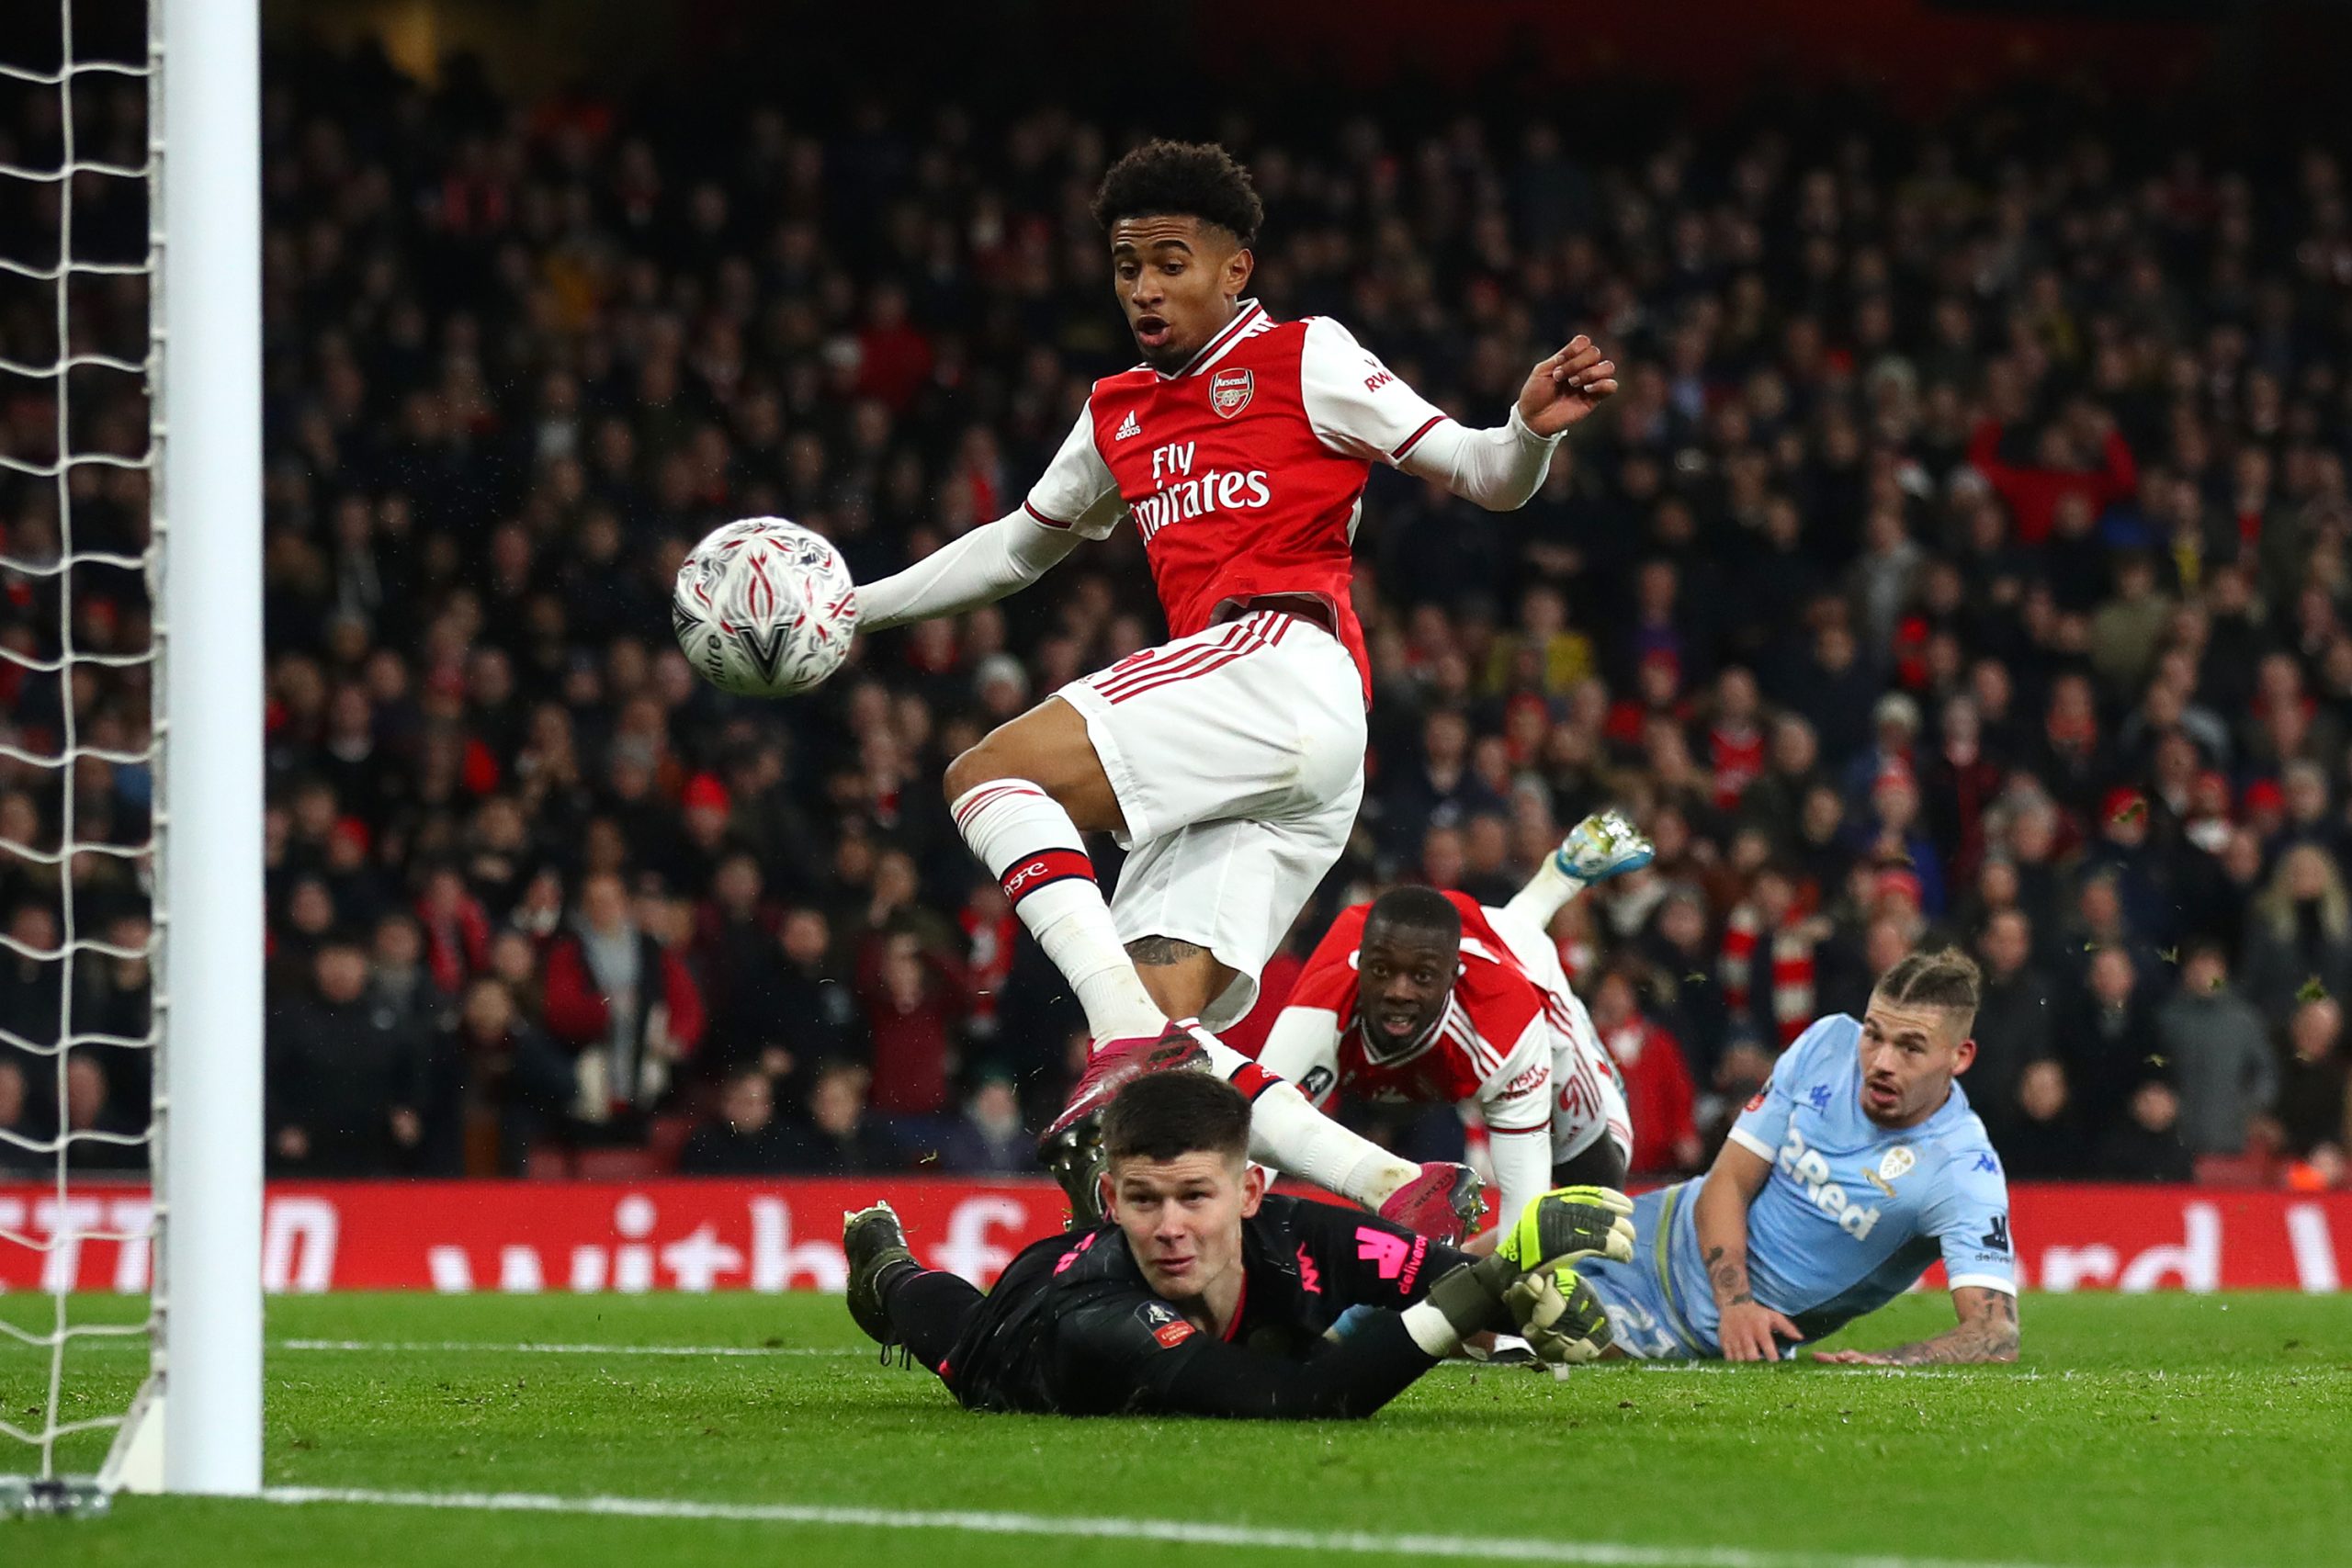 LONDON, ENGLAND - JANUARY 06: Reiss Nelson of Arsenal scores his side's first goal past Illan Meslier of Leeds United during the FA Cup Third Round match between Arsenal FC and Leeds United at the Emirates Stadium on January 06, 2020 in London, England. (Photo by Julian Finney/Getty Images)